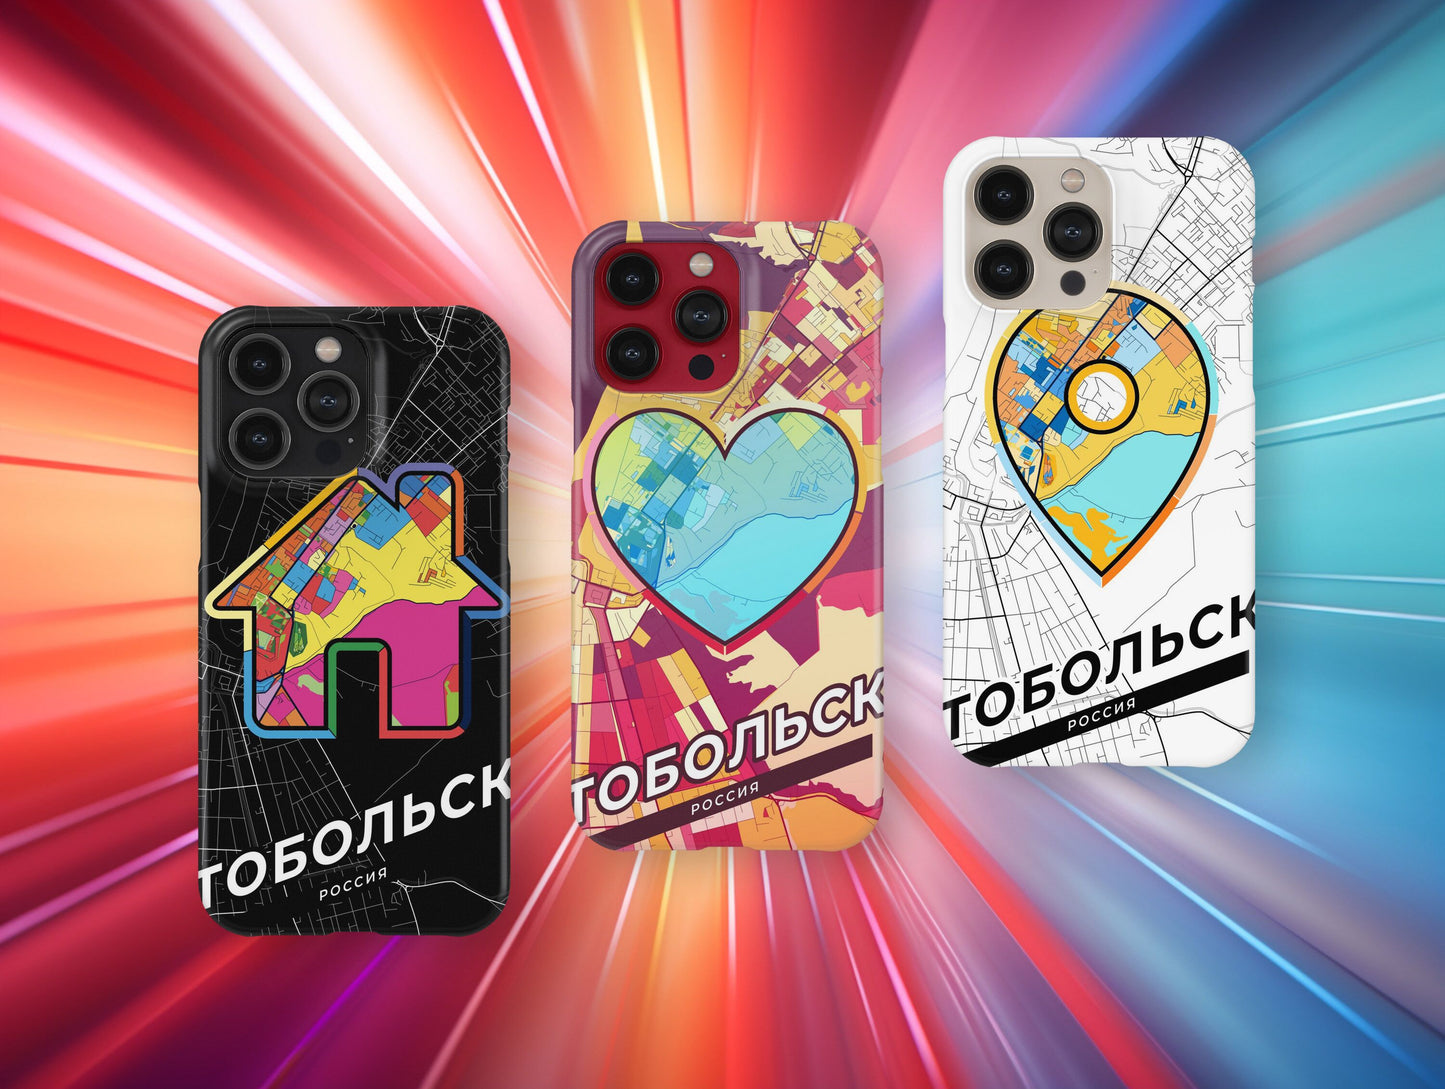 Tobolsk Russia slim phone case with colorful icon